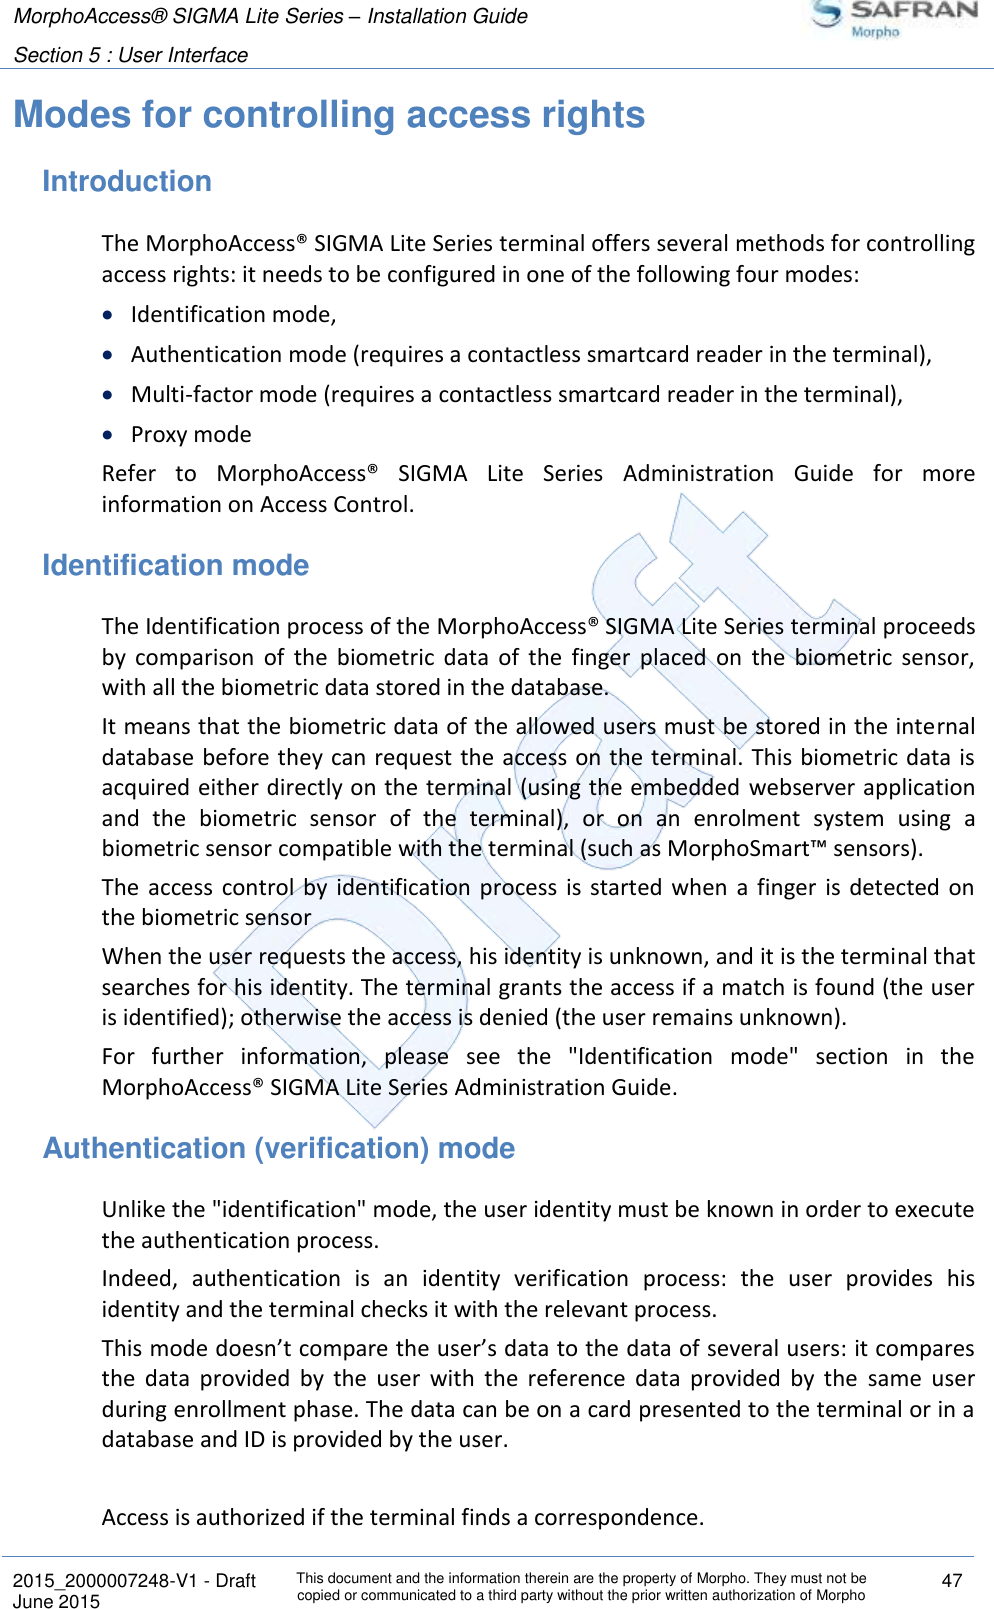 MorphoAccess® SIGMA Lite Series – Installation Guide  Section 5 : User Interface   2015_2000007248-V1 - Draft This document and the information therein are the property of Morpho. They must not be copied or communicated to a third party without the prior written authorization of Morpho 47 June 2015   Modes for controlling access rights Introduction The MorphoAccess® SIGMA Lite Series terminal offers several methods for controlling access rights: it needs to be configured in one of the following four modes:  Identification mode,  Authentication mode (requires a contactless smartcard reader in the terminal),  Multi-factor mode (requires a contactless smartcard reader in the terminal),  Proxy mode Refer  to  MorphoAccess®  SIGMA  Lite  Series  Administration  Guide  for  more information on Access Control. Identification mode The Identification process of the MorphoAccess® SIGMA Lite Series terminal proceeds by  comparison  of  the  biometric  data  of  the  finger  placed  on  the  biometric  sensor, with all the biometric data stored in the database. It means that the biometric data of the allowed users must be stored in the internal database before they  can request the access on the terminal. This biometric data is acquired either directly on the terminal (using the embedded webserver application and  the  biometric  sensor  of  the  terminal),  or  on  an  enrolment  system  using  a biometric sensor compatible with the terminal (such as MorphoSmart™ sensors). The  access  control  by  identification process  is  started  when  a  finger  is  detected  on the biometric sensor When the user requests the access, his identity is unknown, and it is the terminal that searches for his identity. The terminal grants the access if a match is found (the user is identified); otherwise the access is denied (the user remains unknown). For  further  information,  please  see  the  &quot;Identification  mode&quot;  section  in  the MorphoAccess® SIGMA Lite Series Administration Guide. Authentication (verification) mode Unlike the &quot;identification&quot; mode, the user identity must be known in order to execute the authentication process. Indeed,  authentication  is  an  identity  verification  process:  the  user  provides  his identity and the terminal checks it with the relevant process. This mode doesn’t compare the user’s data to the data of several users: it compares the  data  provided  by  the  user  with  the  reference  data  provided  by  the  same  user during enrollment phase. The data can be on a card presented to the terminal or in a database and ID is provided by the user.  Access is authorized if the terminal finds a correspondence. 